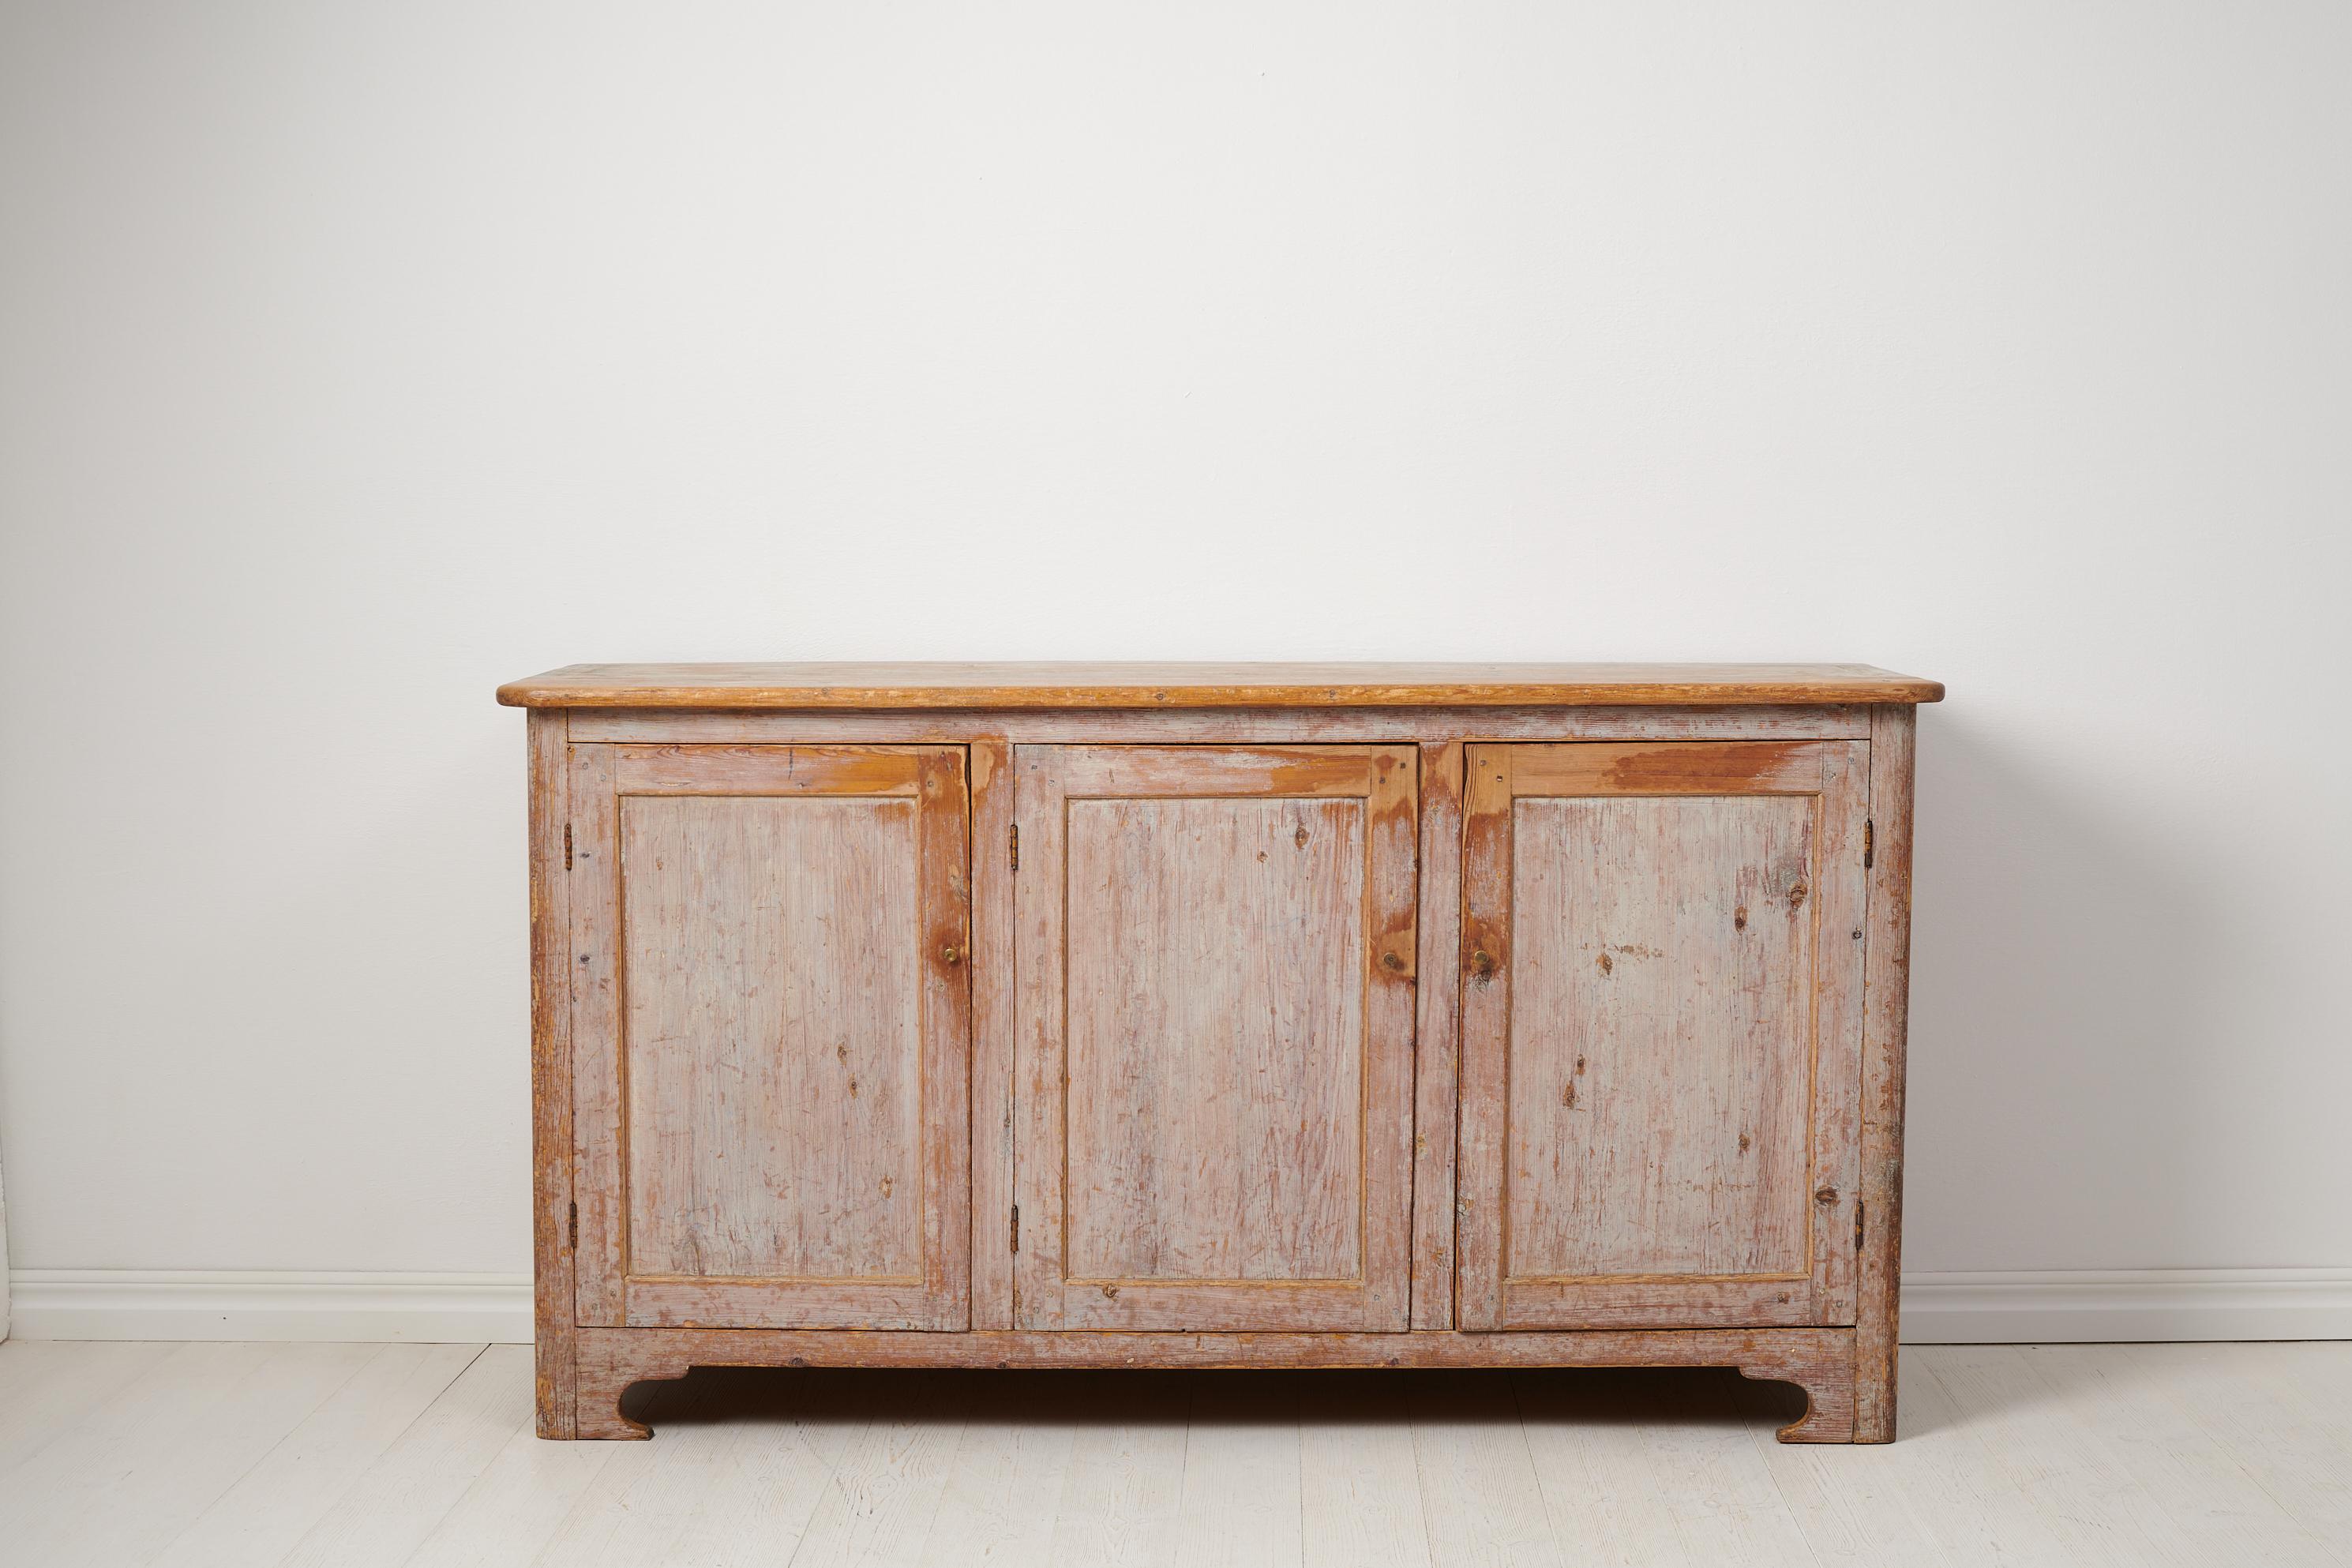 Antique country house sideboard from northern Sweden made around 1840. The sideboard is a genuine Swedish country house furniture made by hand in solid pine. The sideboard has old historic paint with traces of use and distress to the paint.

The